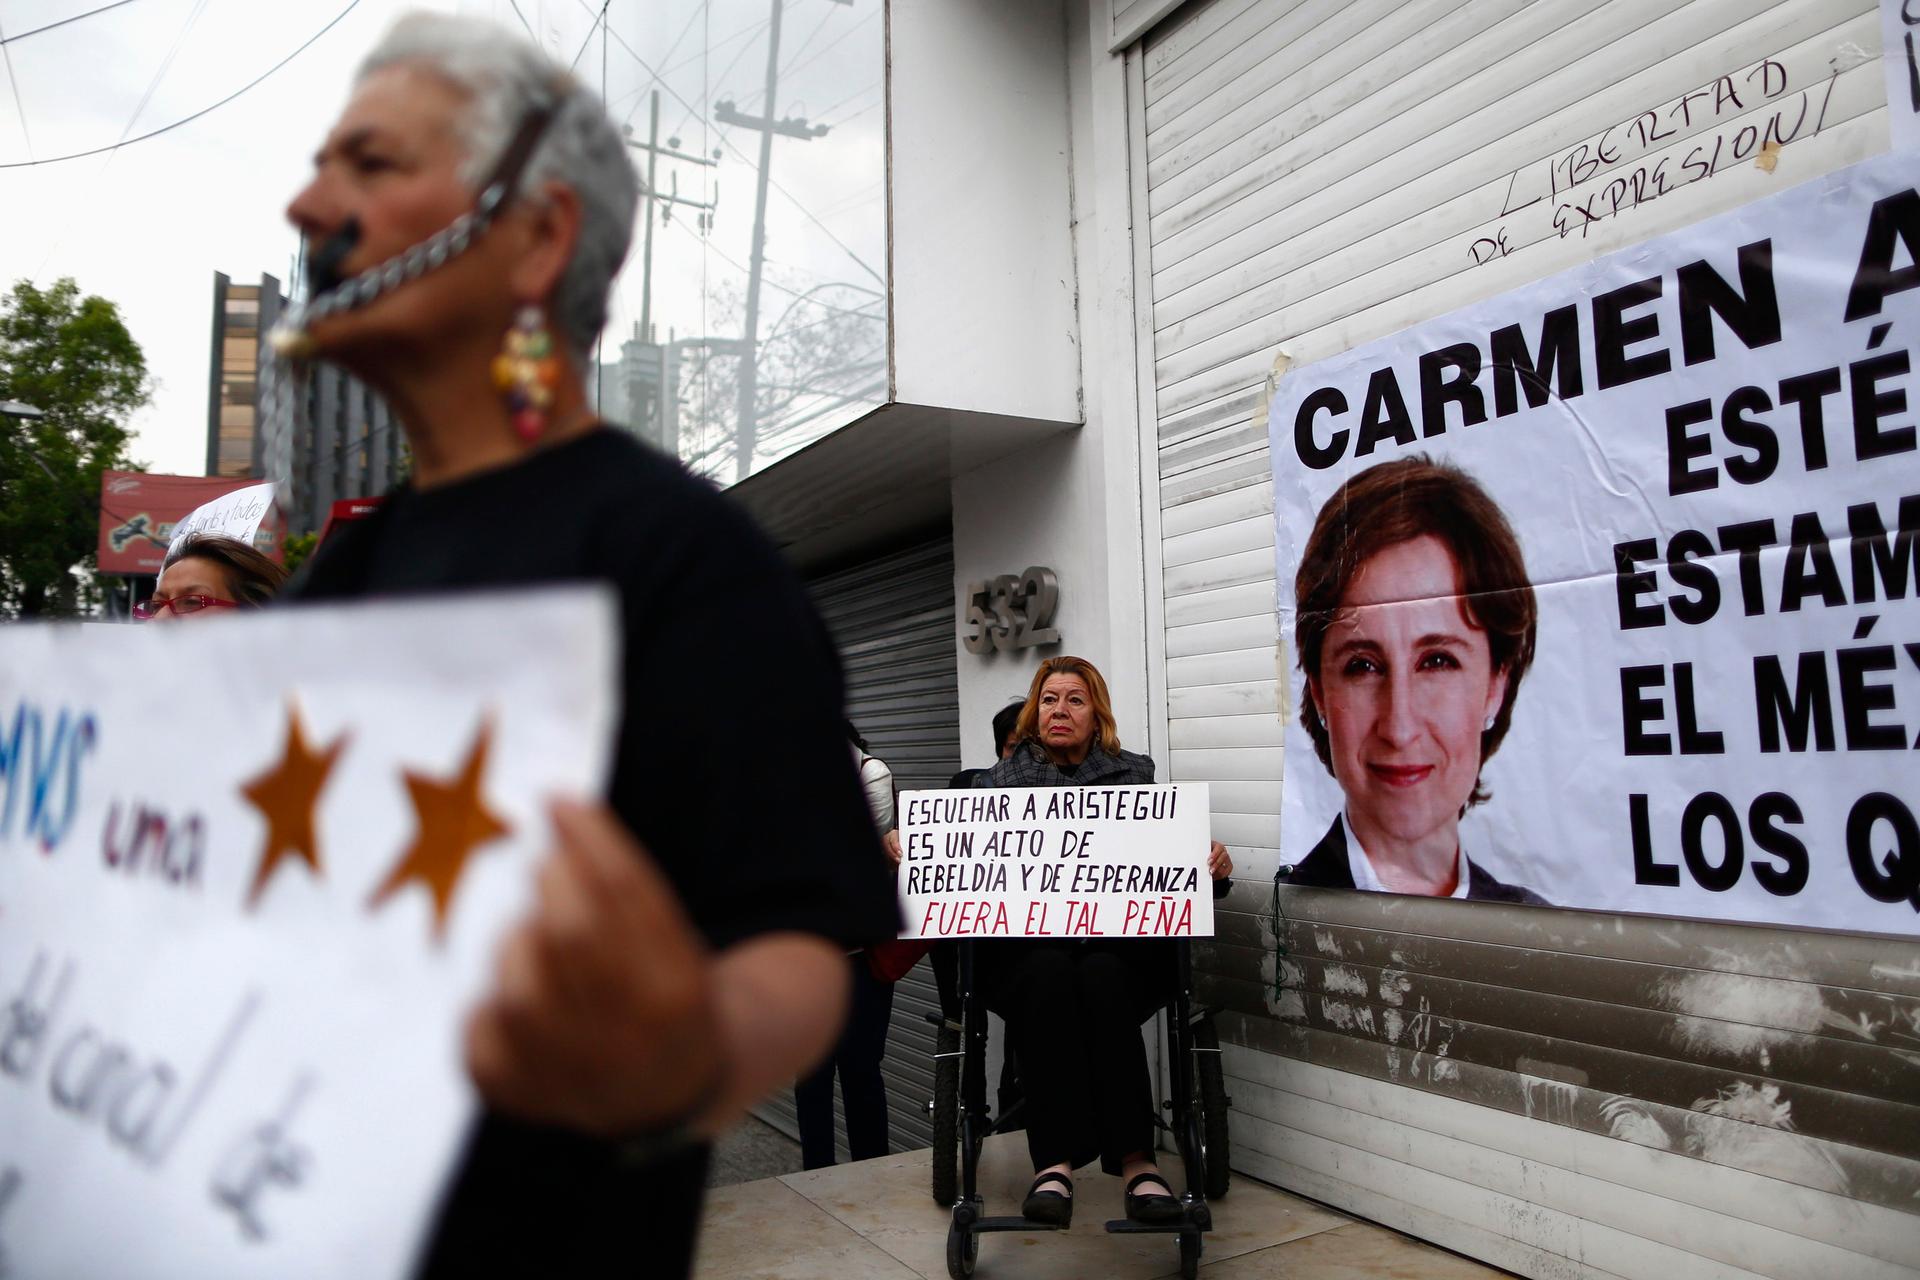 A supporter holds a sign during a protest on March 16, 2015, outside MVS Radio in Mexico City gainst the dismissal of Mexican journalist Carmen Aristegui.